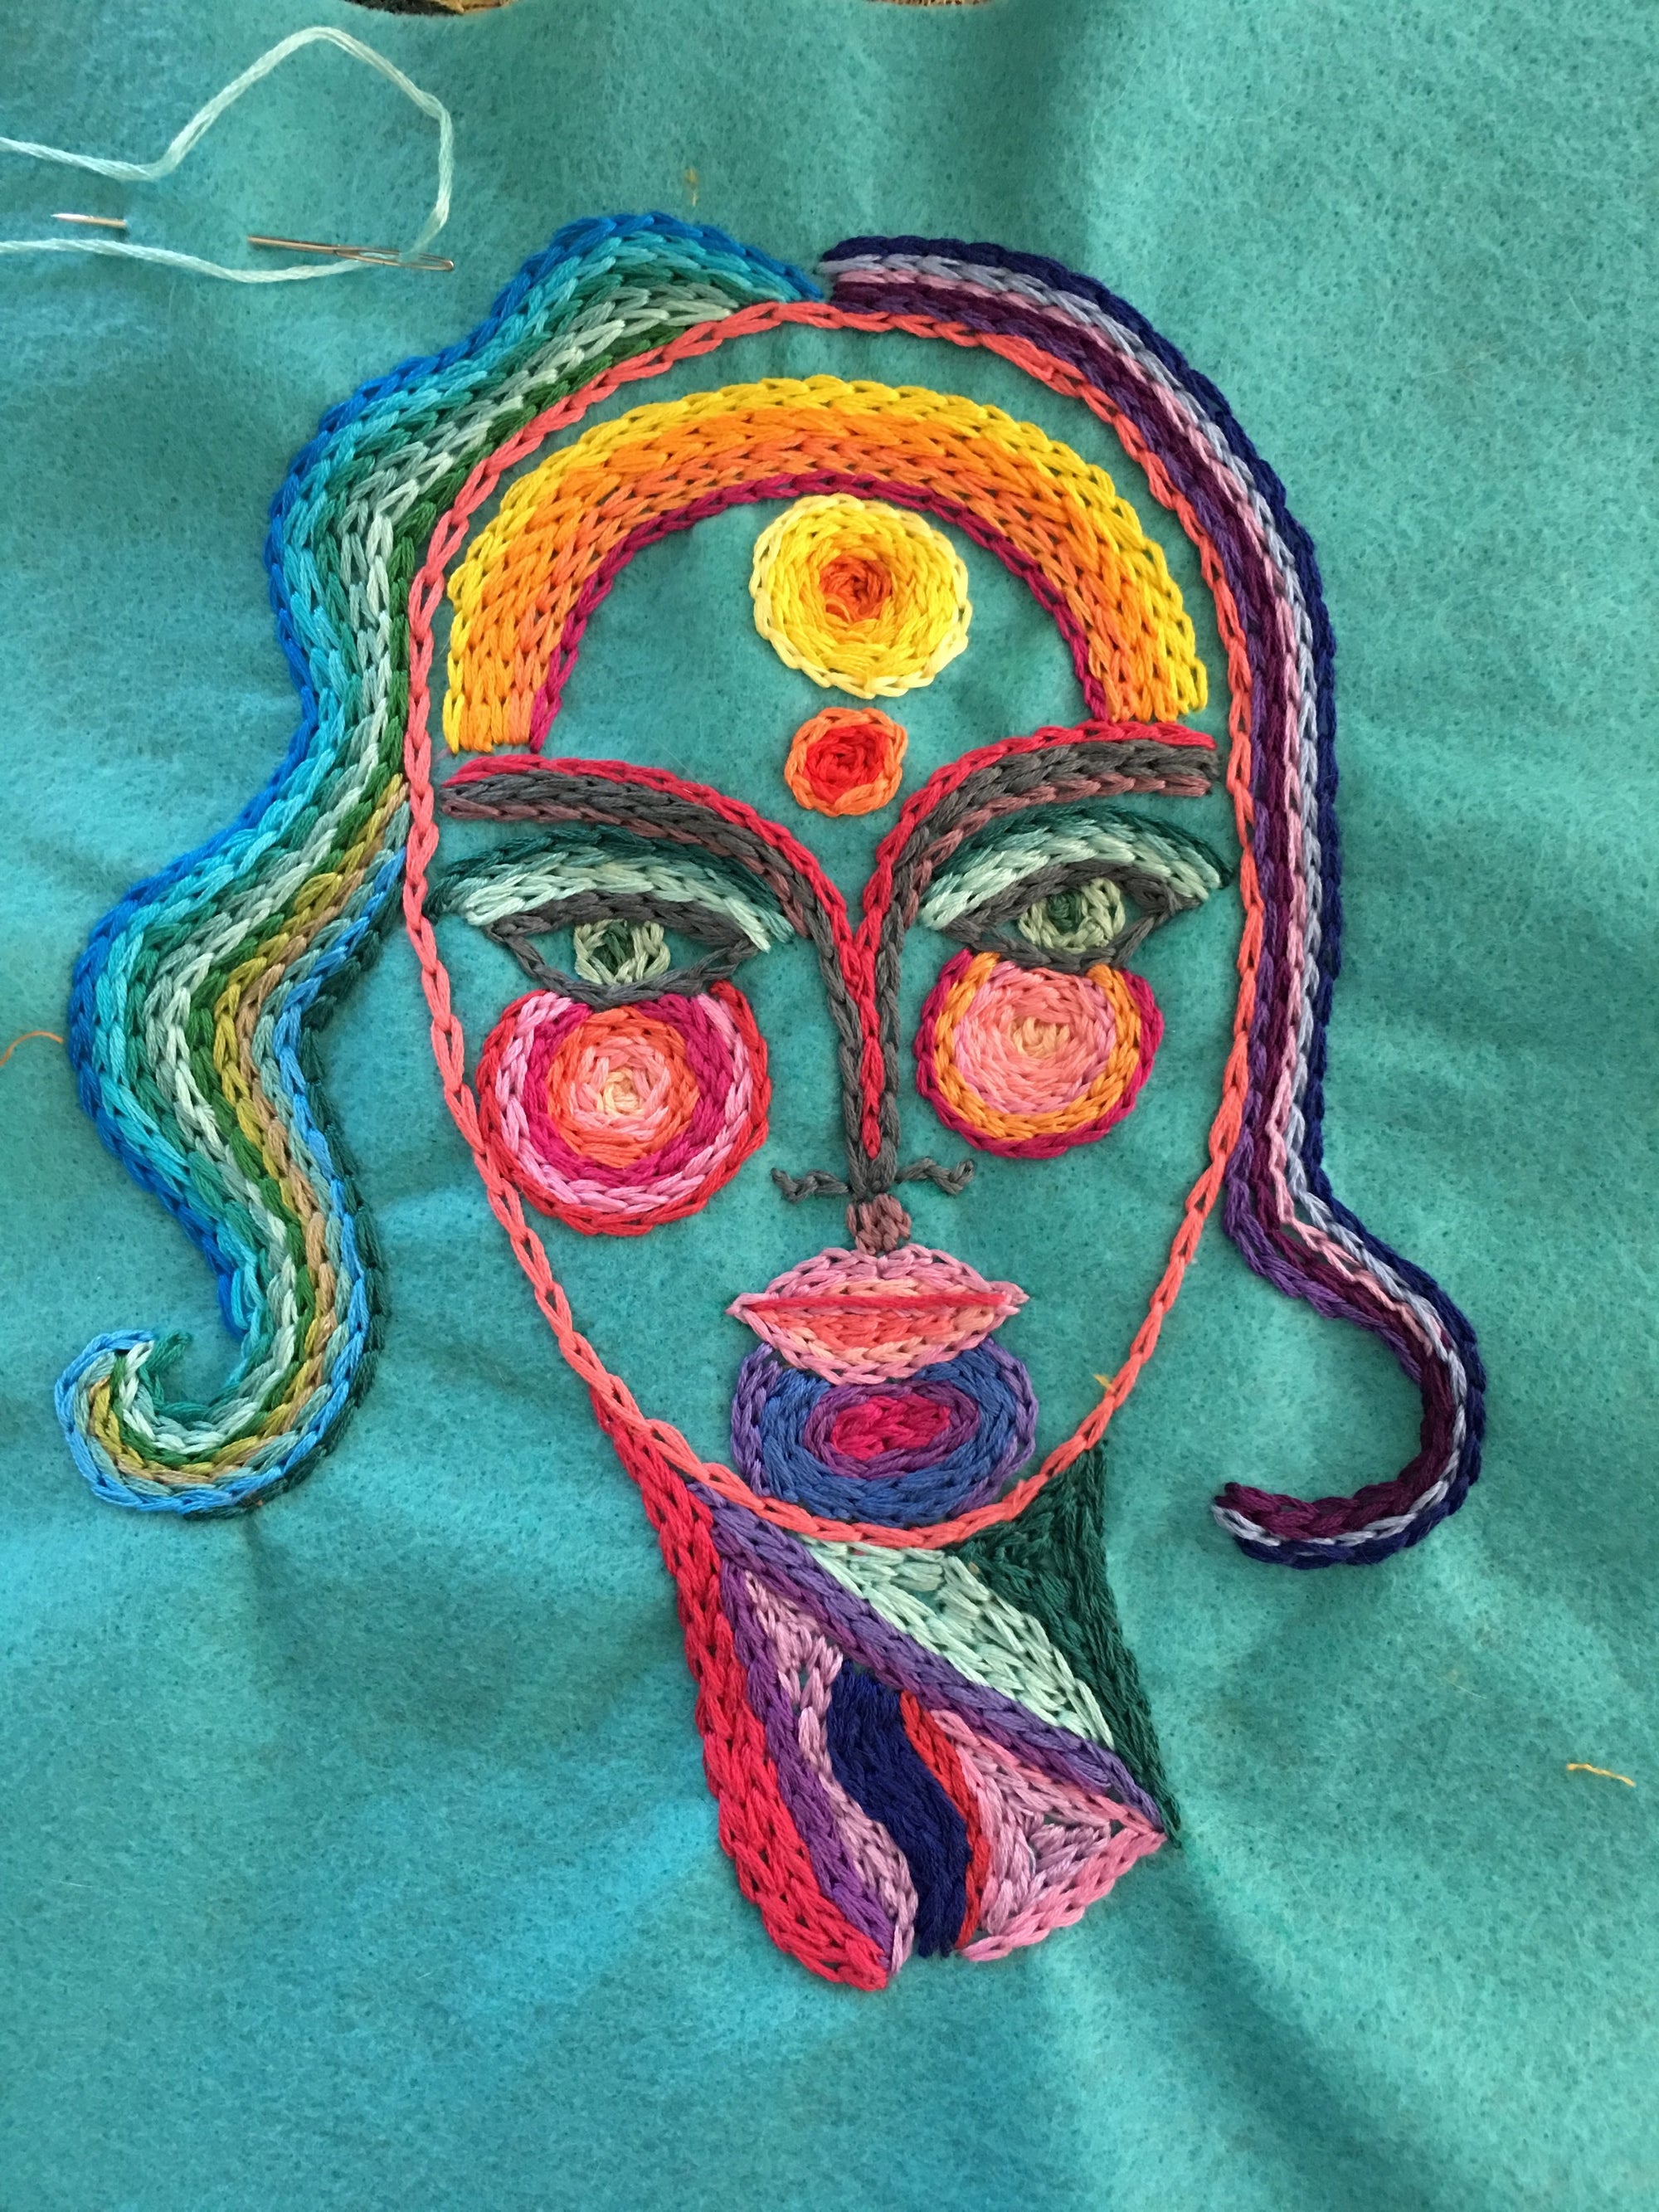 Chainstitch Embroidery Patch Workshop With Meret Piderman, May 4th (3 hrs)